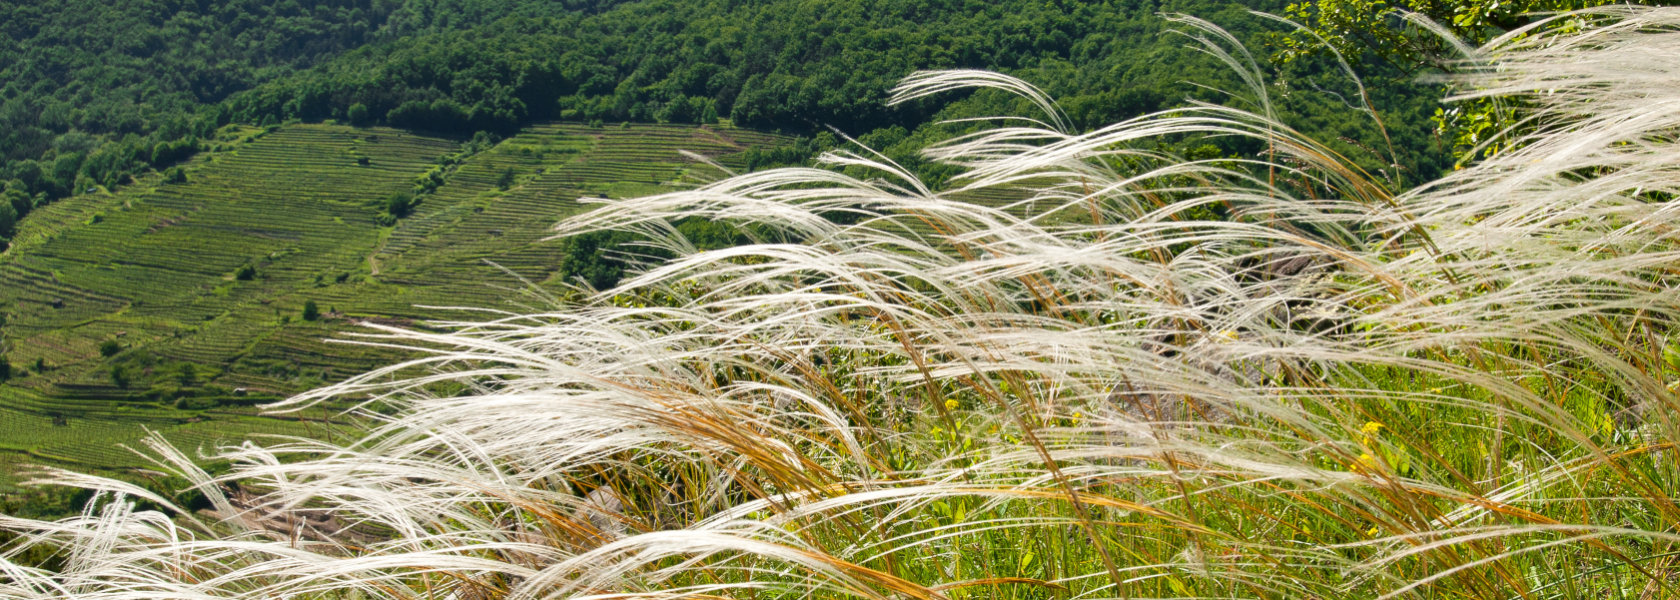 Gentle and original - feather grass combines nature and culture. It may only be harvested for local customary purposes and is considered a category in the Wachau wine, © Markus Haslinger